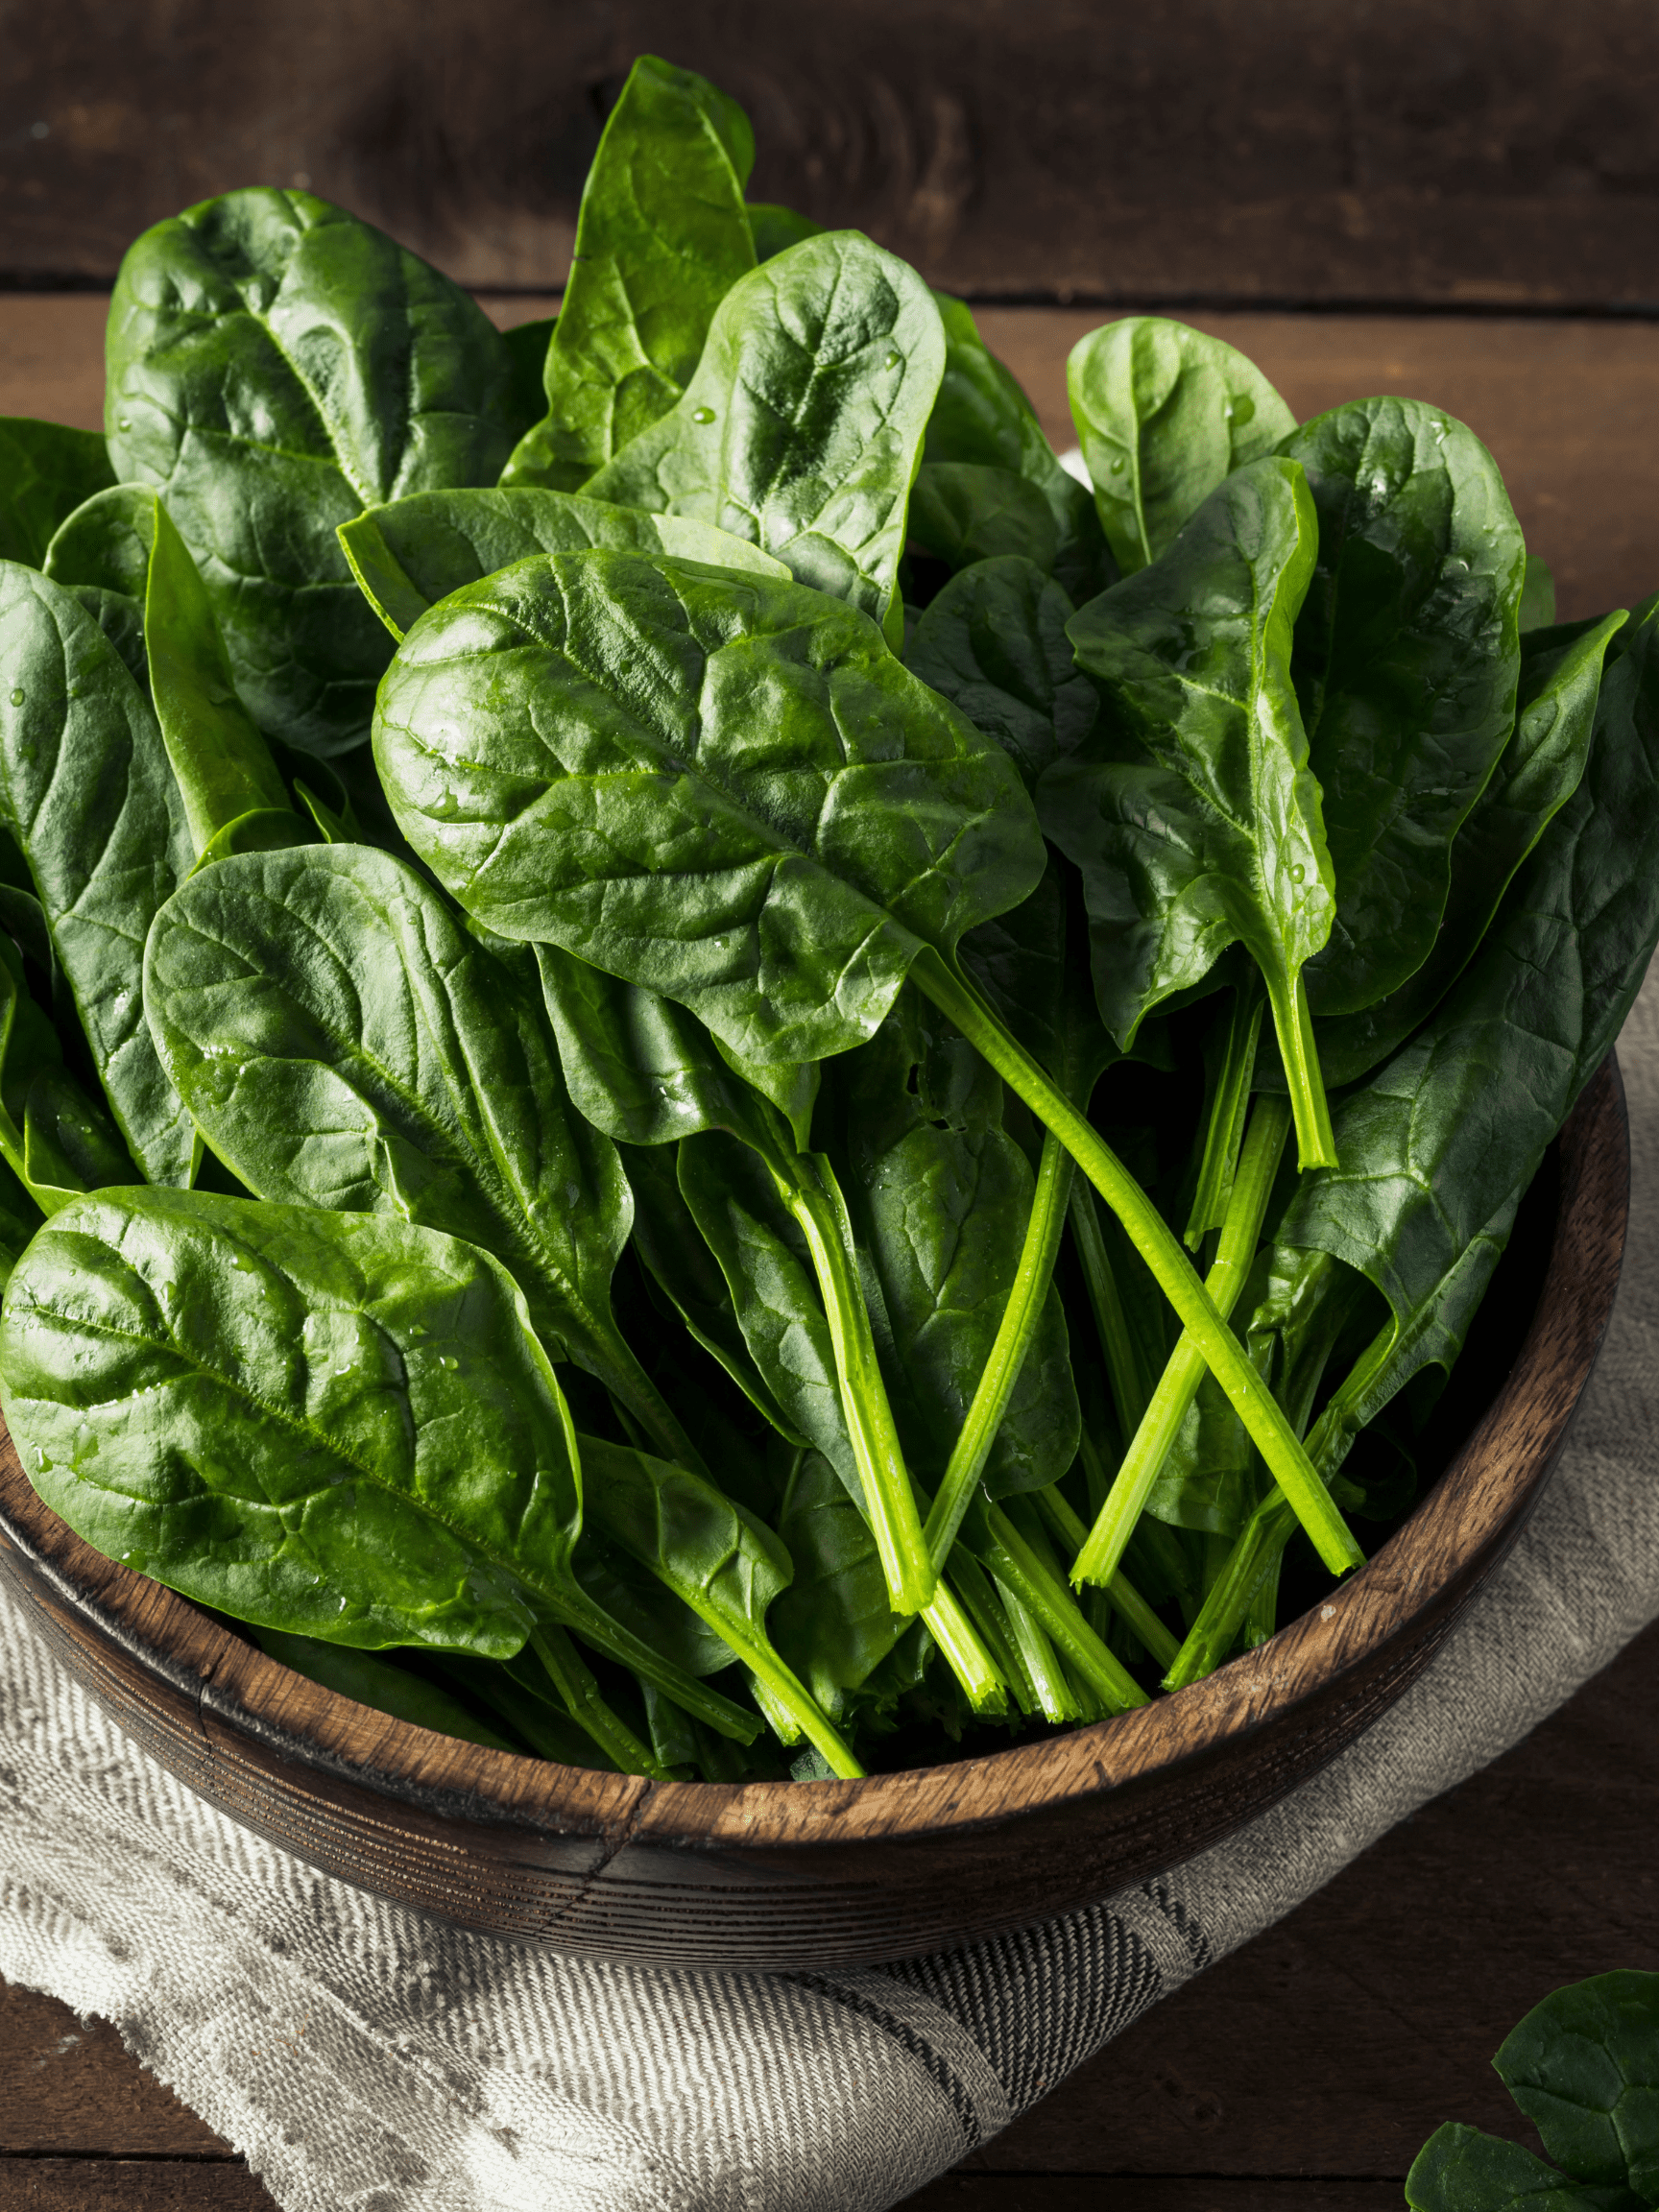 spinach in a wooden bowl on a white linen napkin